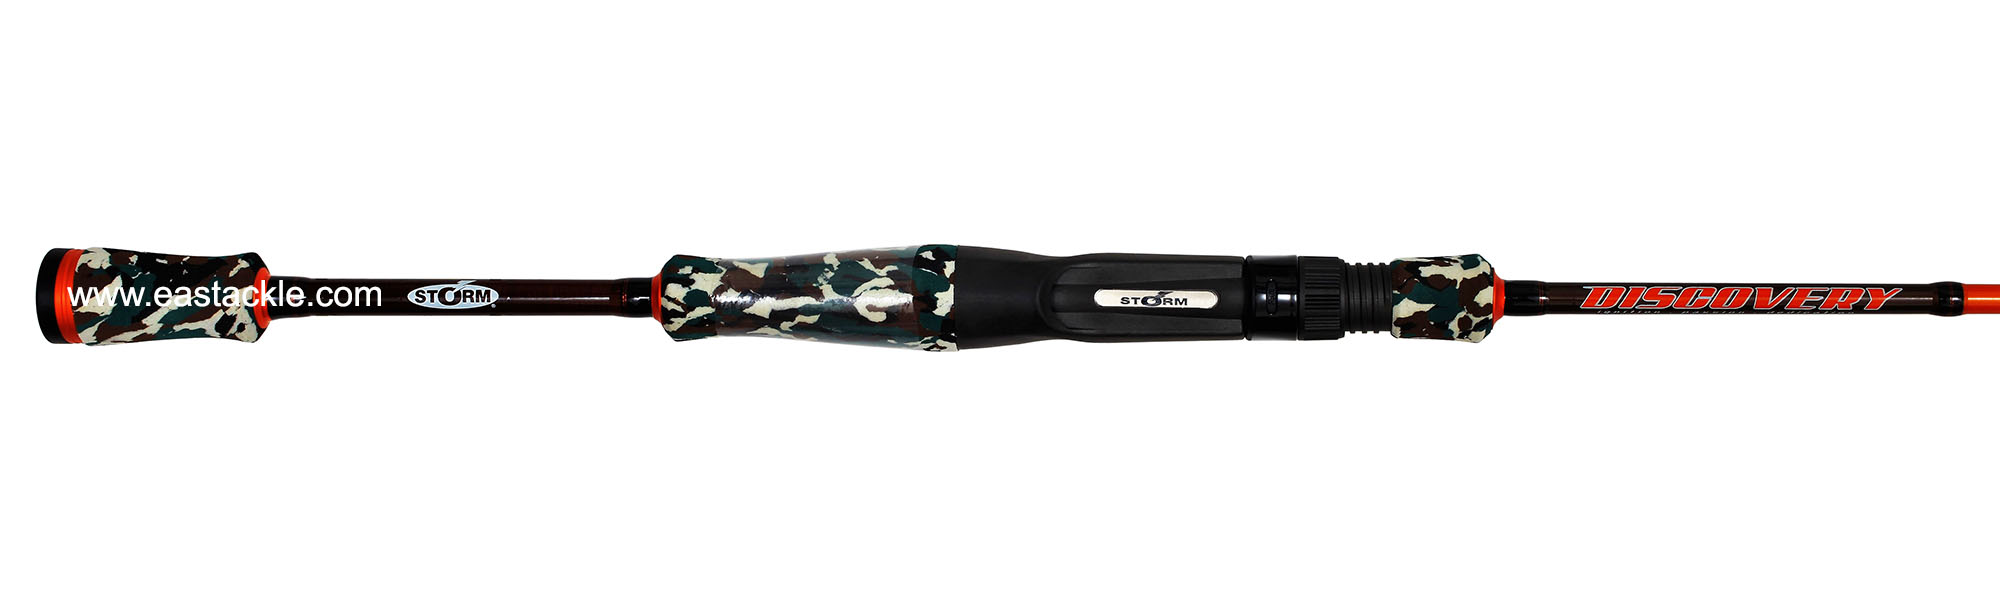 Storm - Discovery - DVC602UL - Bait Casting Rod - Butt to Stripper Guide (Top View) | Eastackle